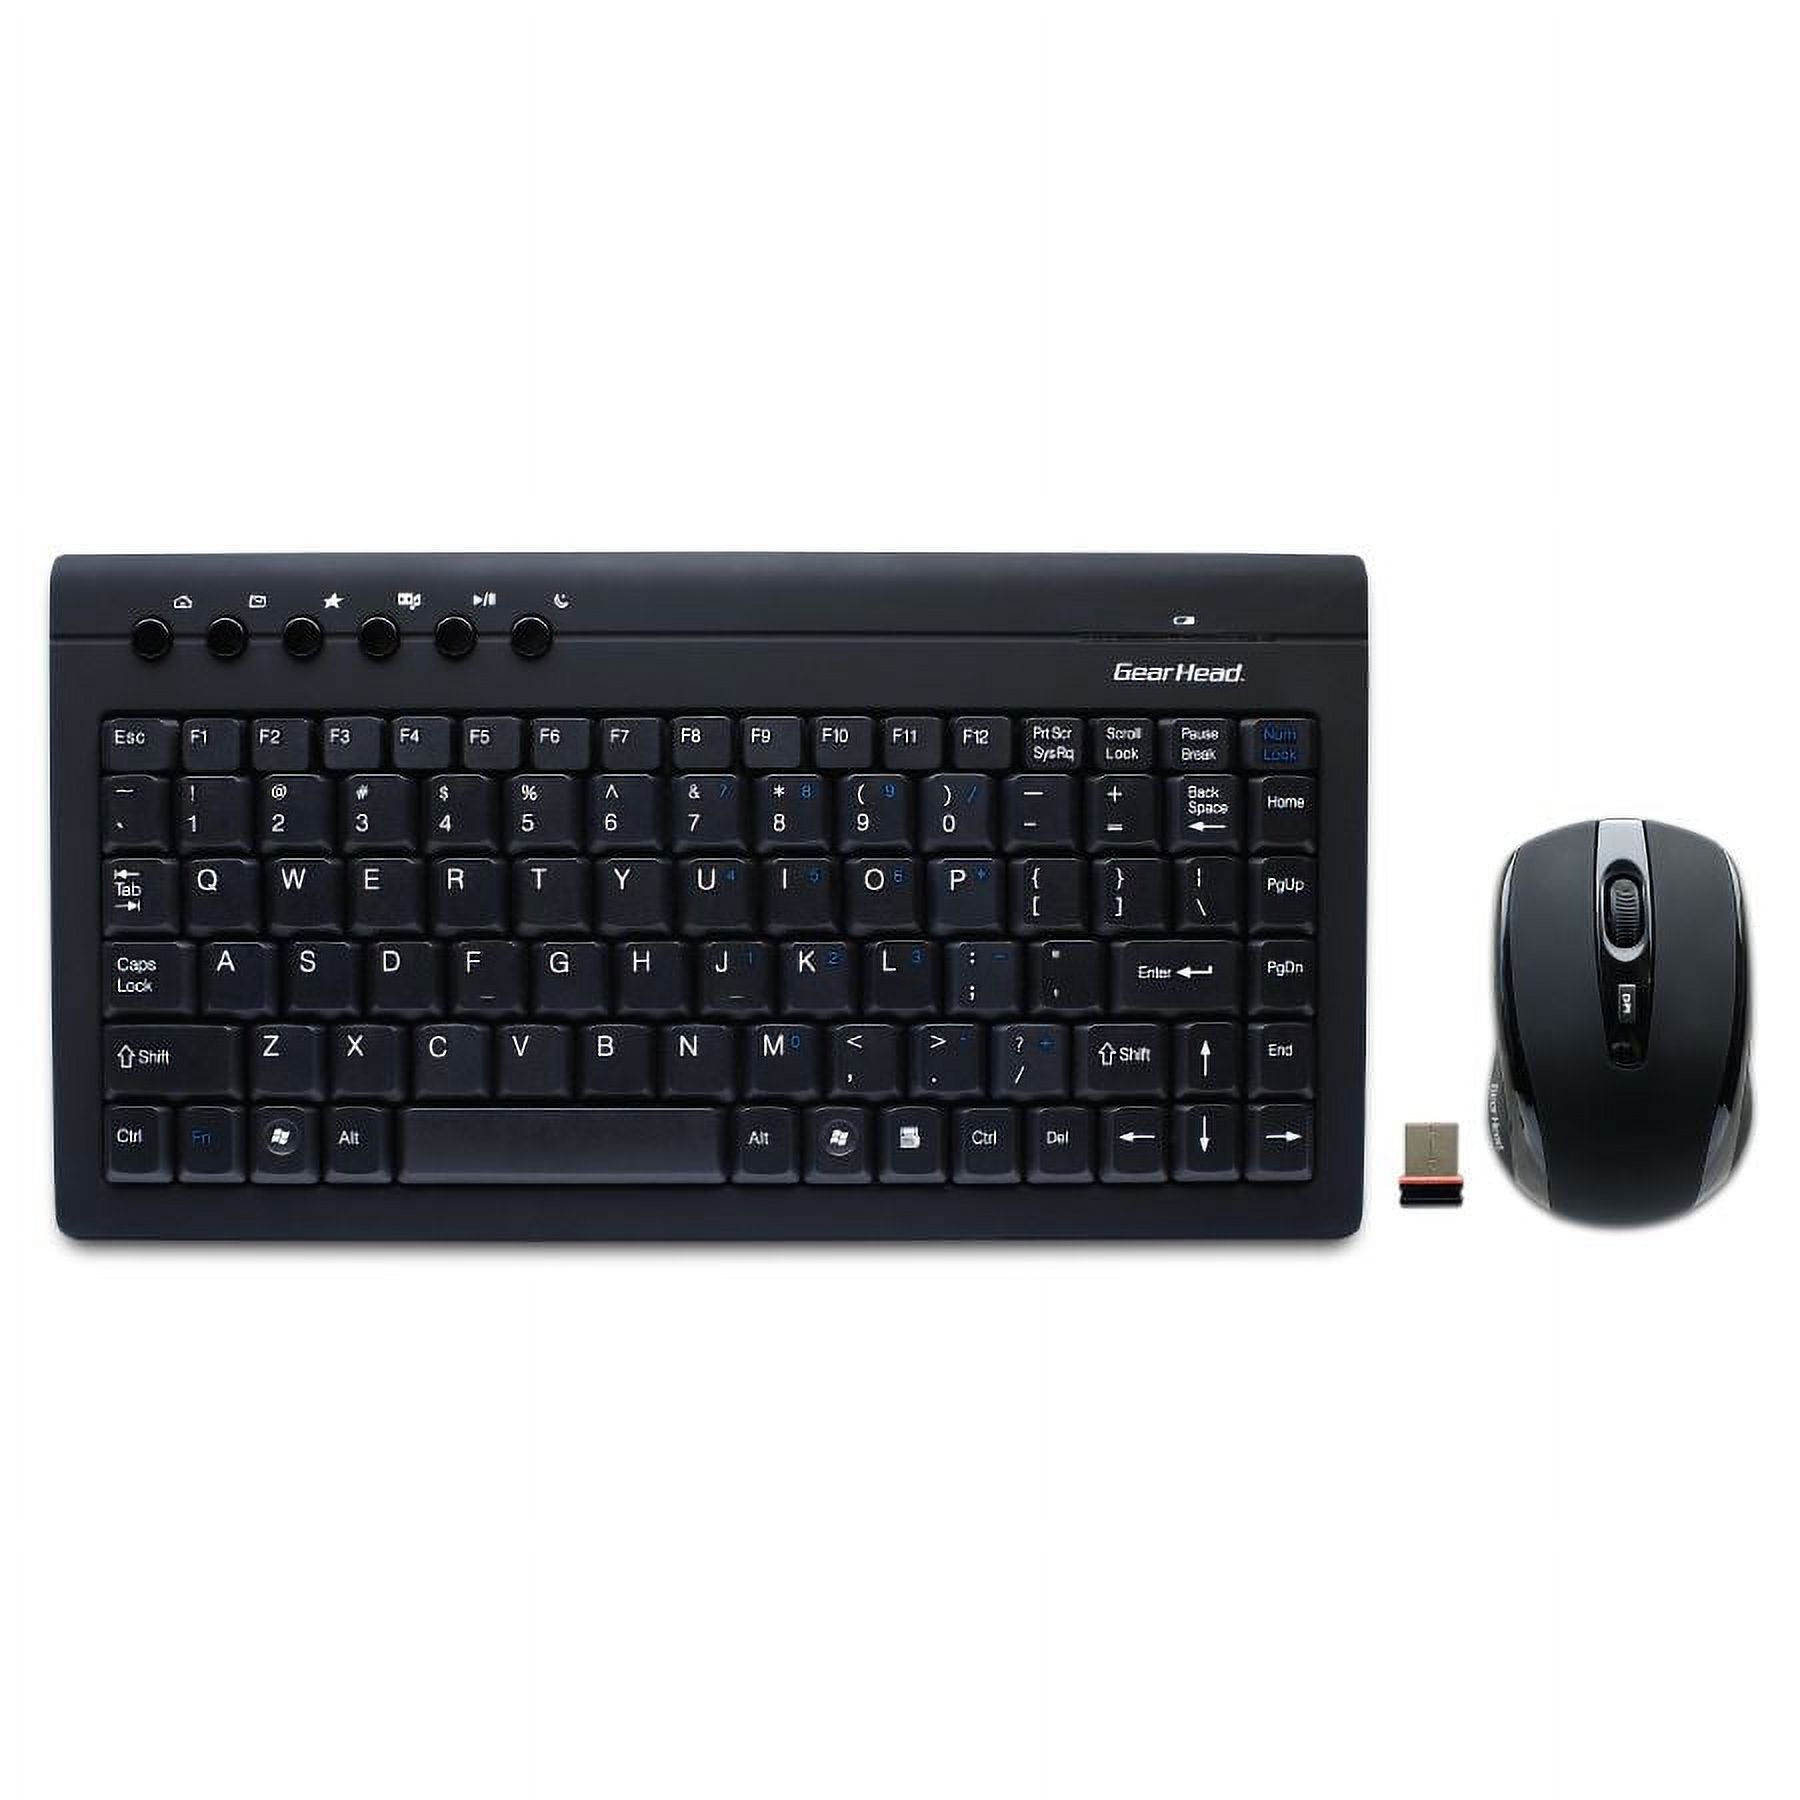 AU2.4GHZ MINI WIRELESS KEYBOARD AND OPTICAL MOUSE - image 2 of 2